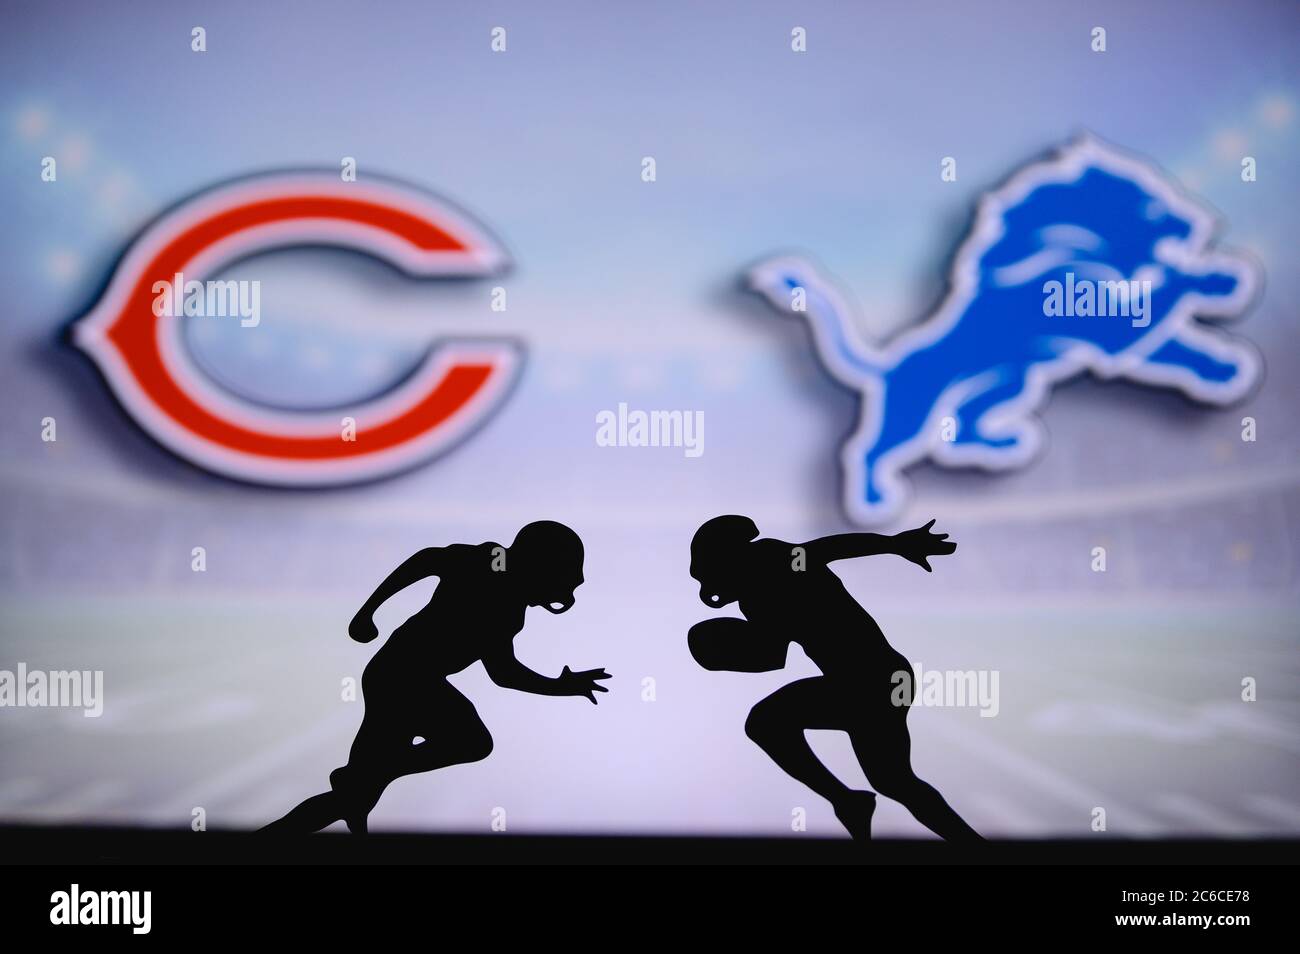 Chicago Bears vs. Detroit Lions. NFL match poster. Two american football players silhouette facing each other on the field. Clubs logo in background. Stock Photo